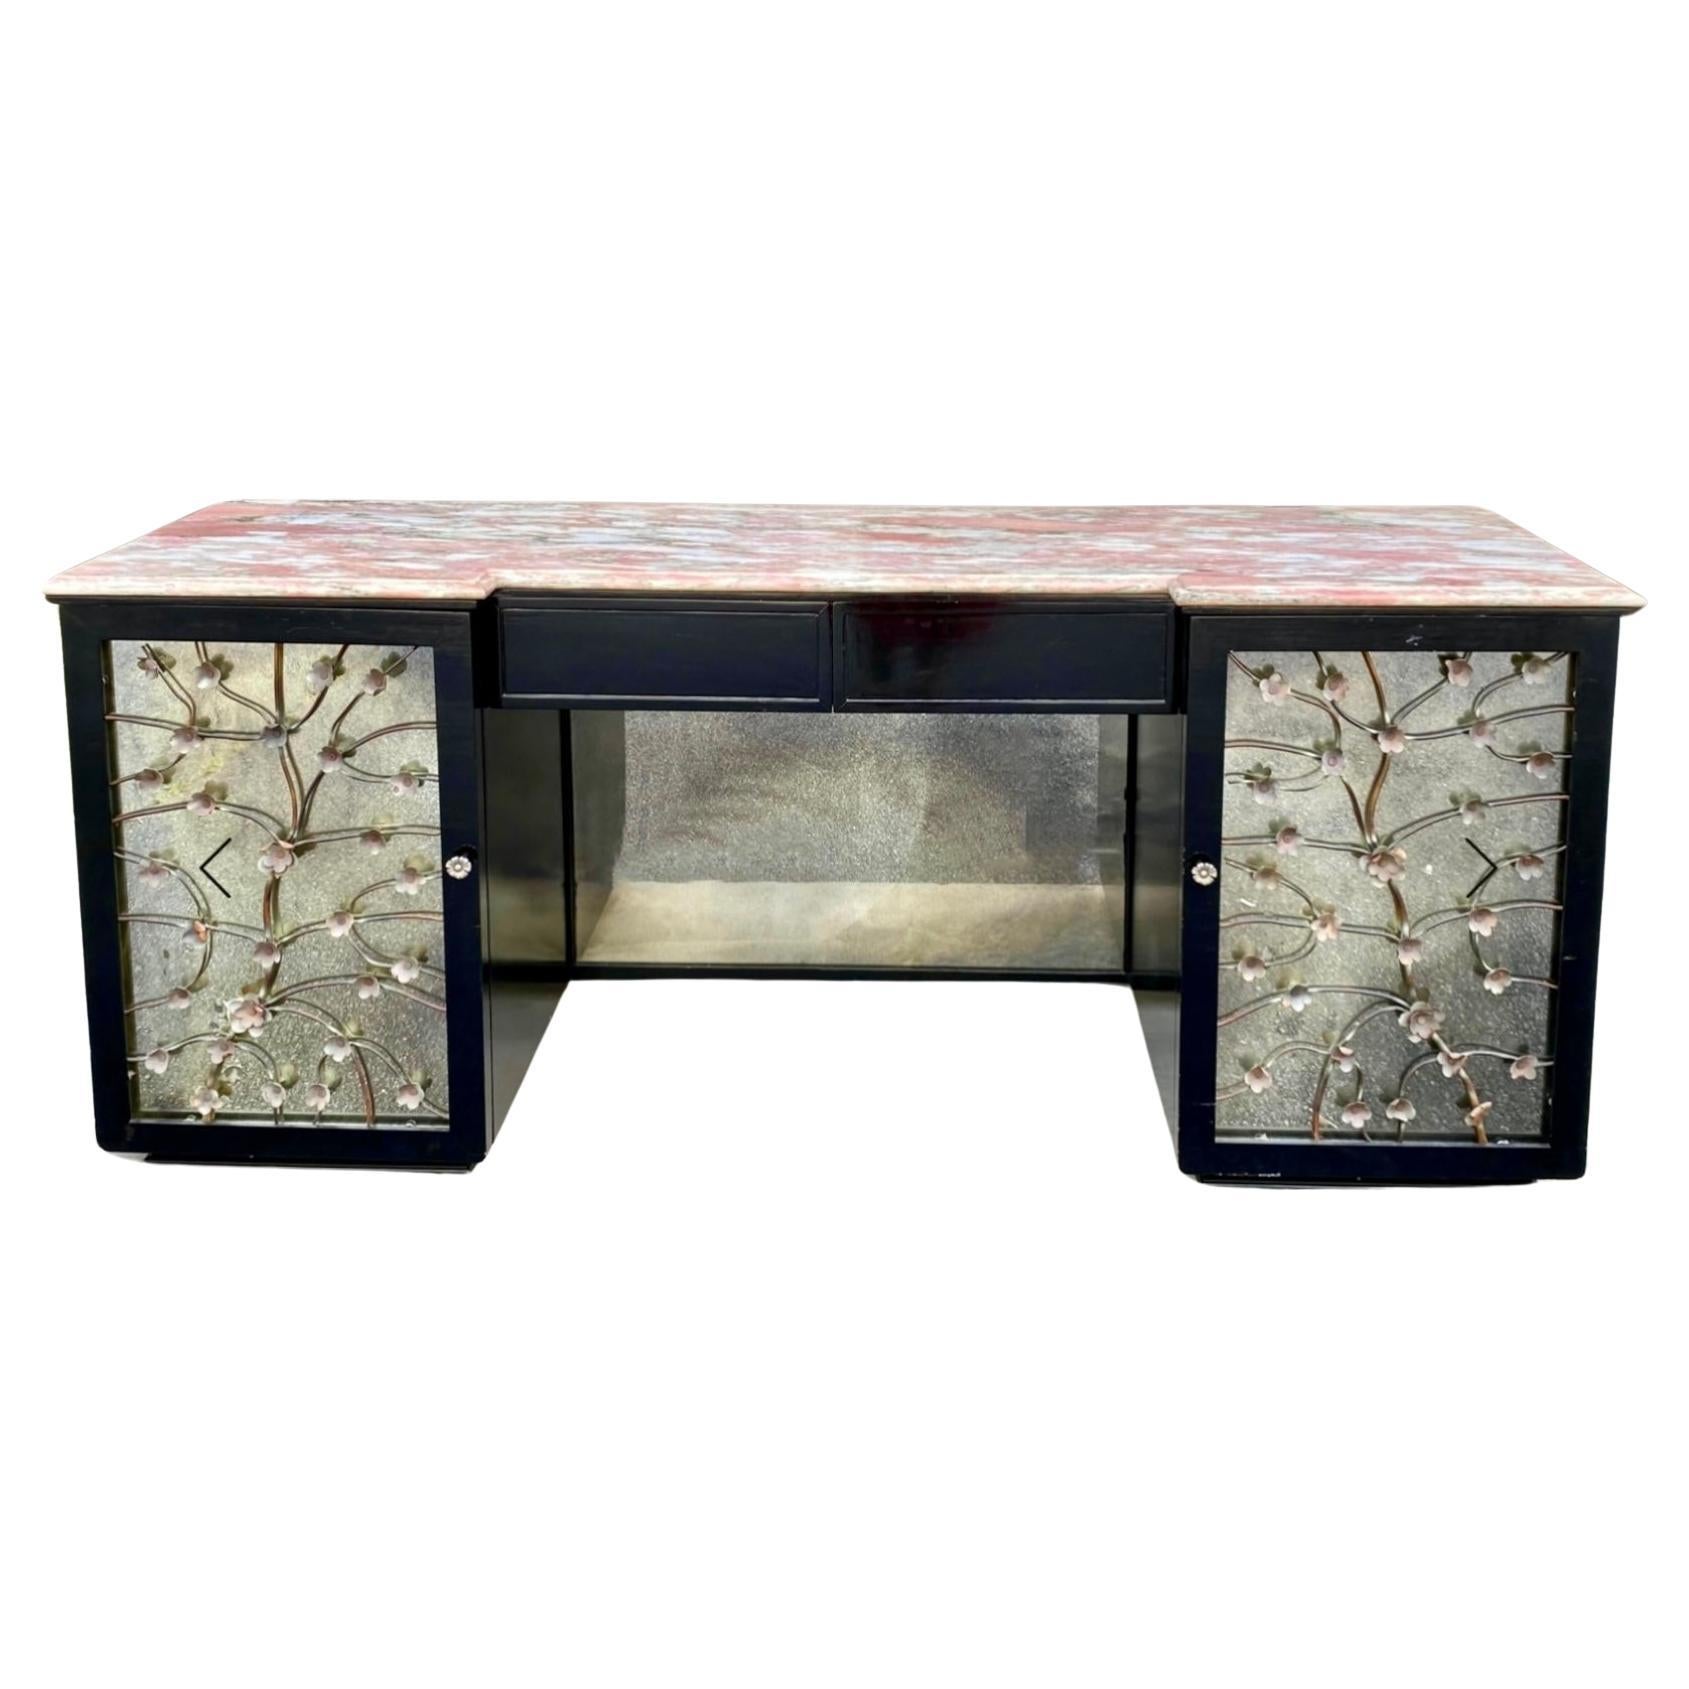 Hollywood Regency Floral Tole Mirrored Sideboard / Credenza W/ Pink Marble Top